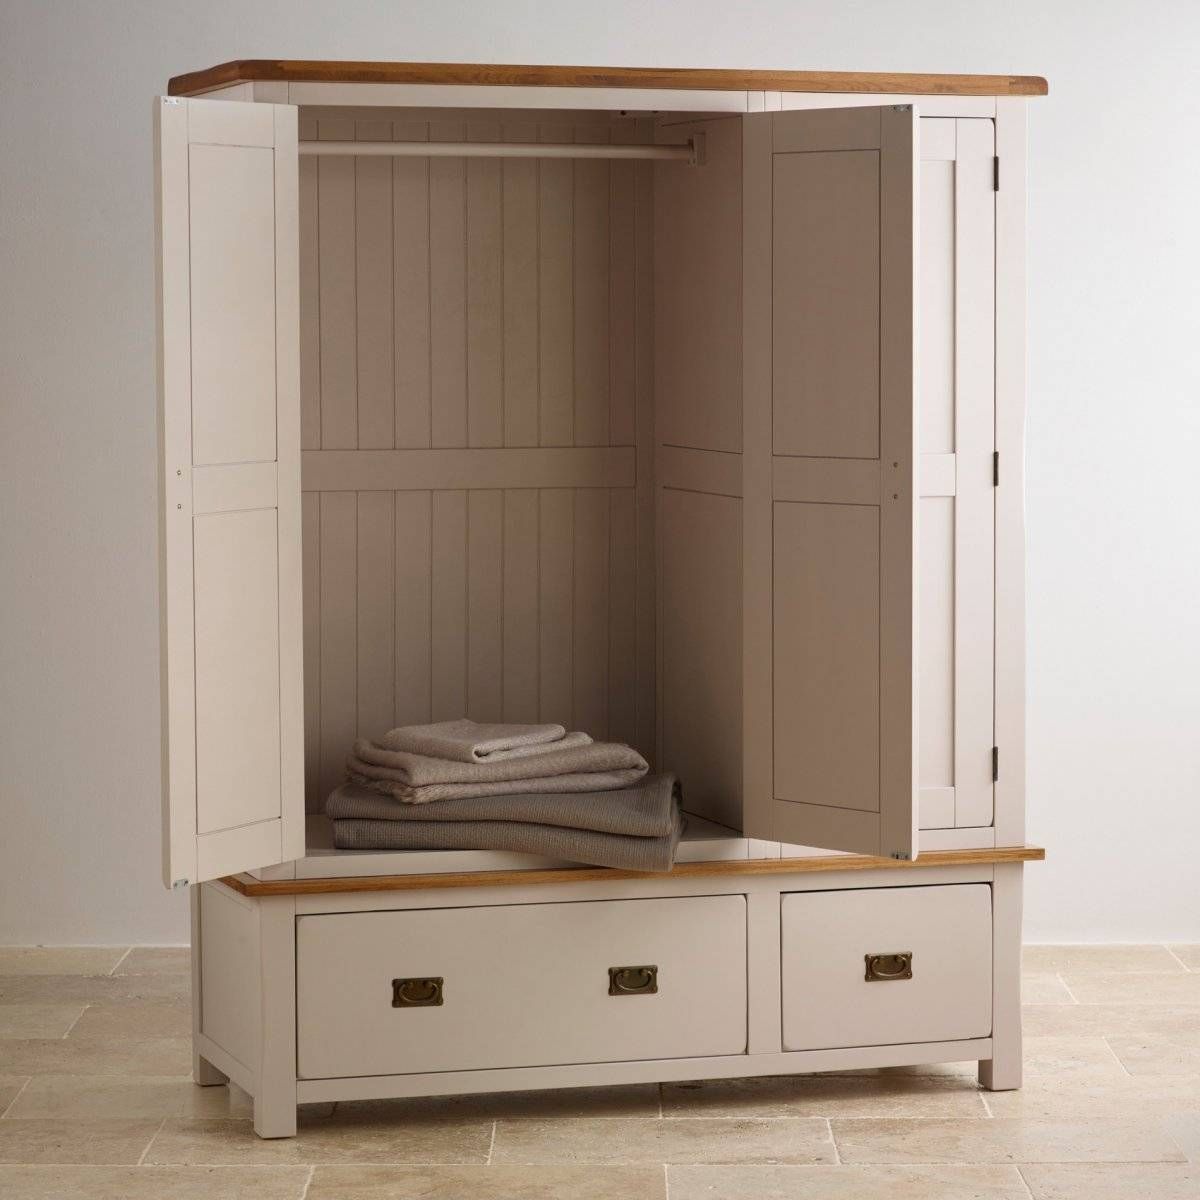 Kemble Triple Wardrobe In Painted Oak | Oak Furniture Land Within Triple Wardrobes With Drawers (View 14 of 15)